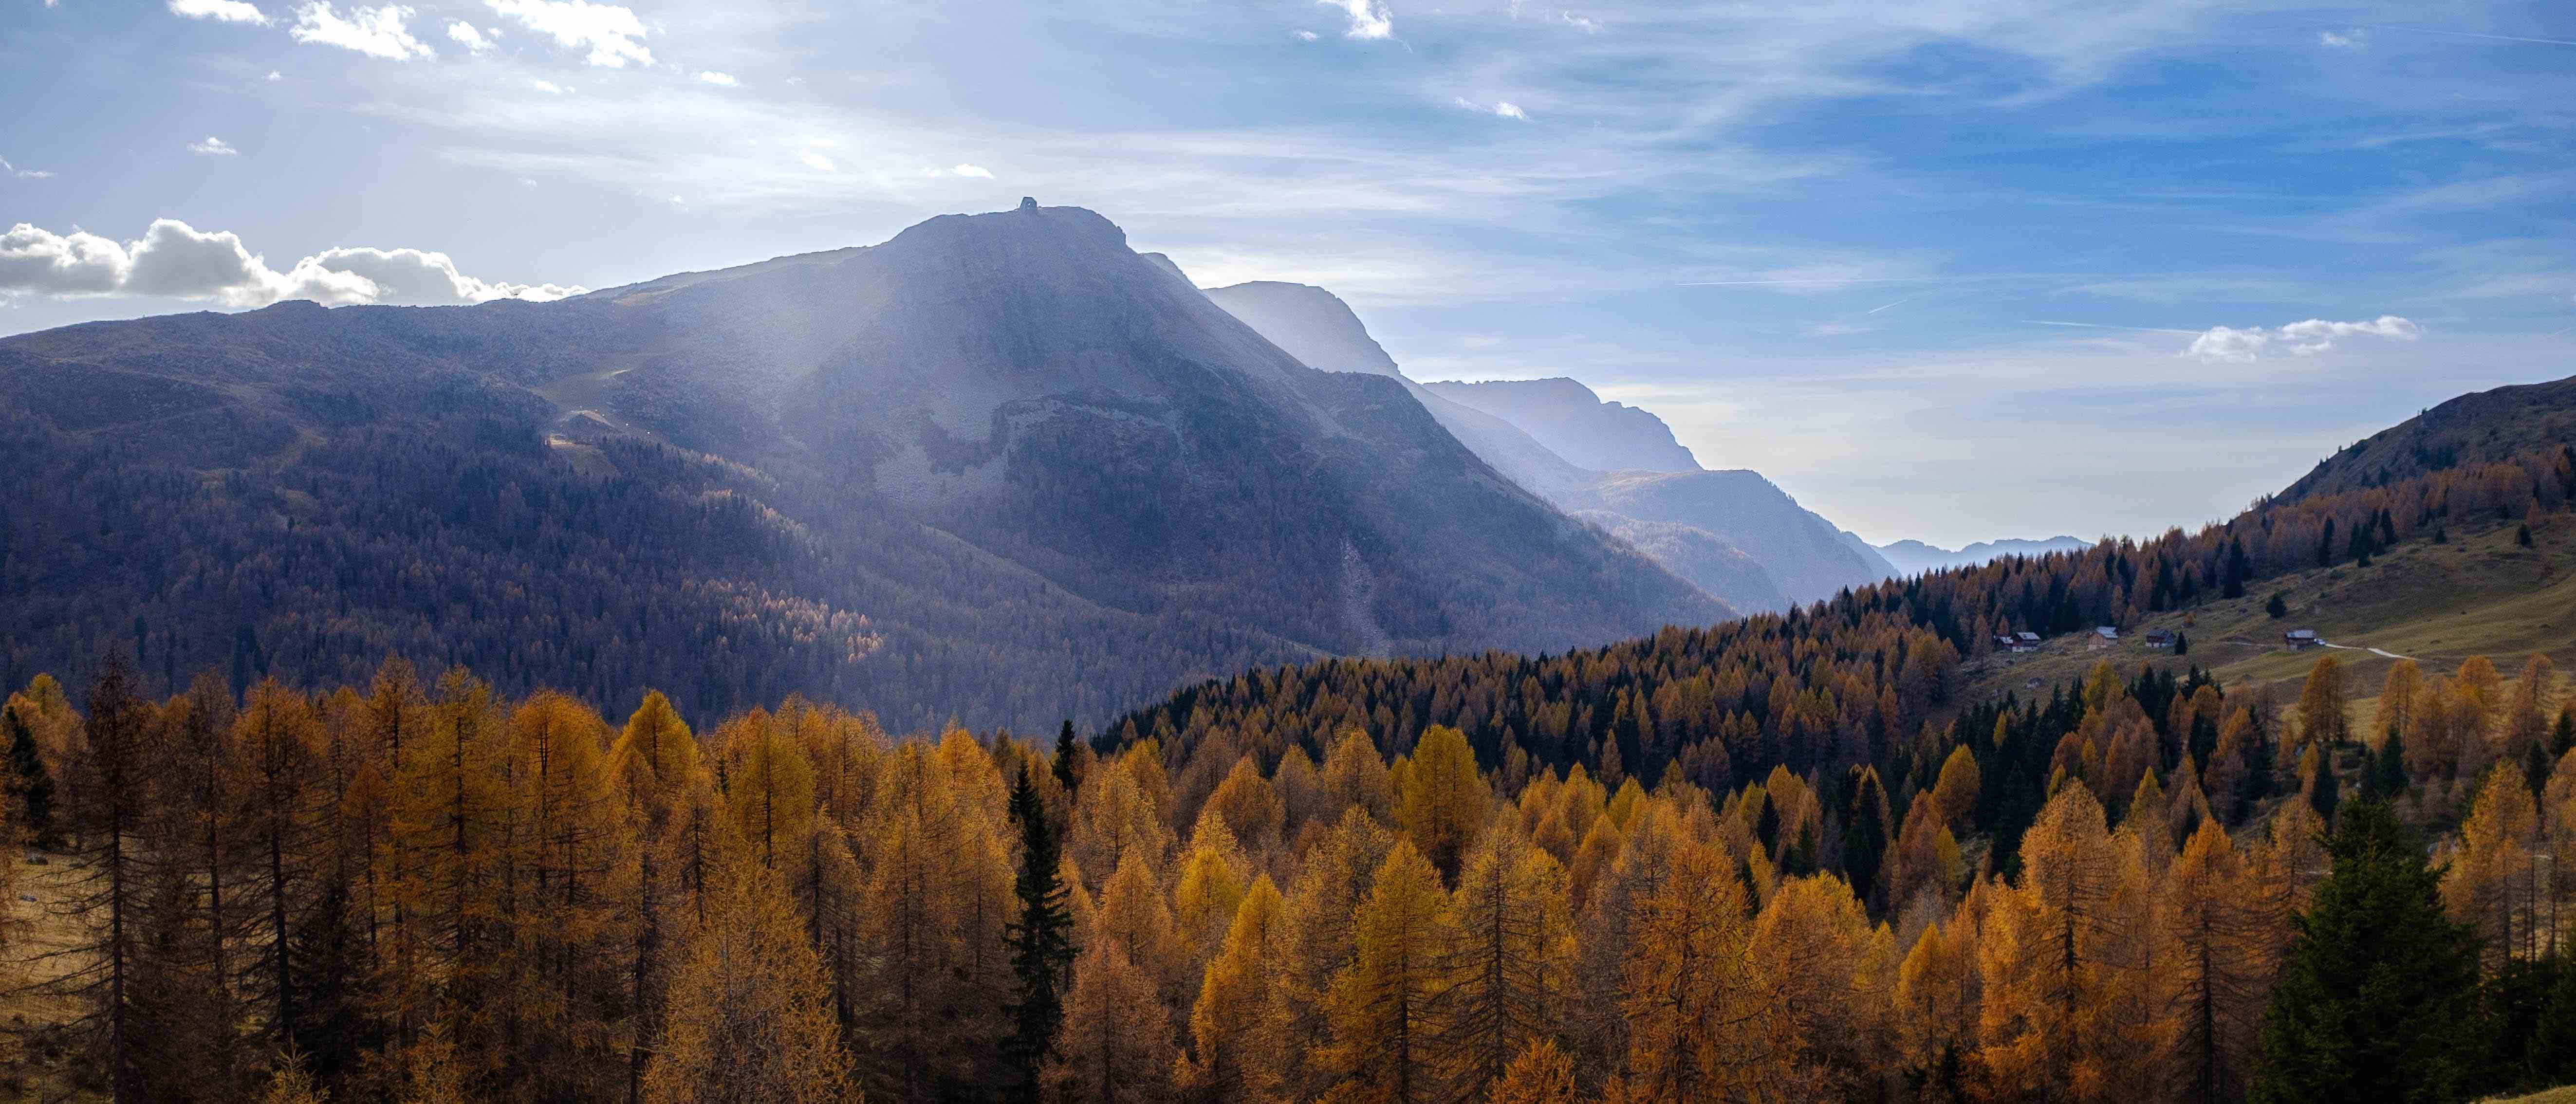 photo of yellow trees in the foreground and tall mountains in the background with light through broken clouds